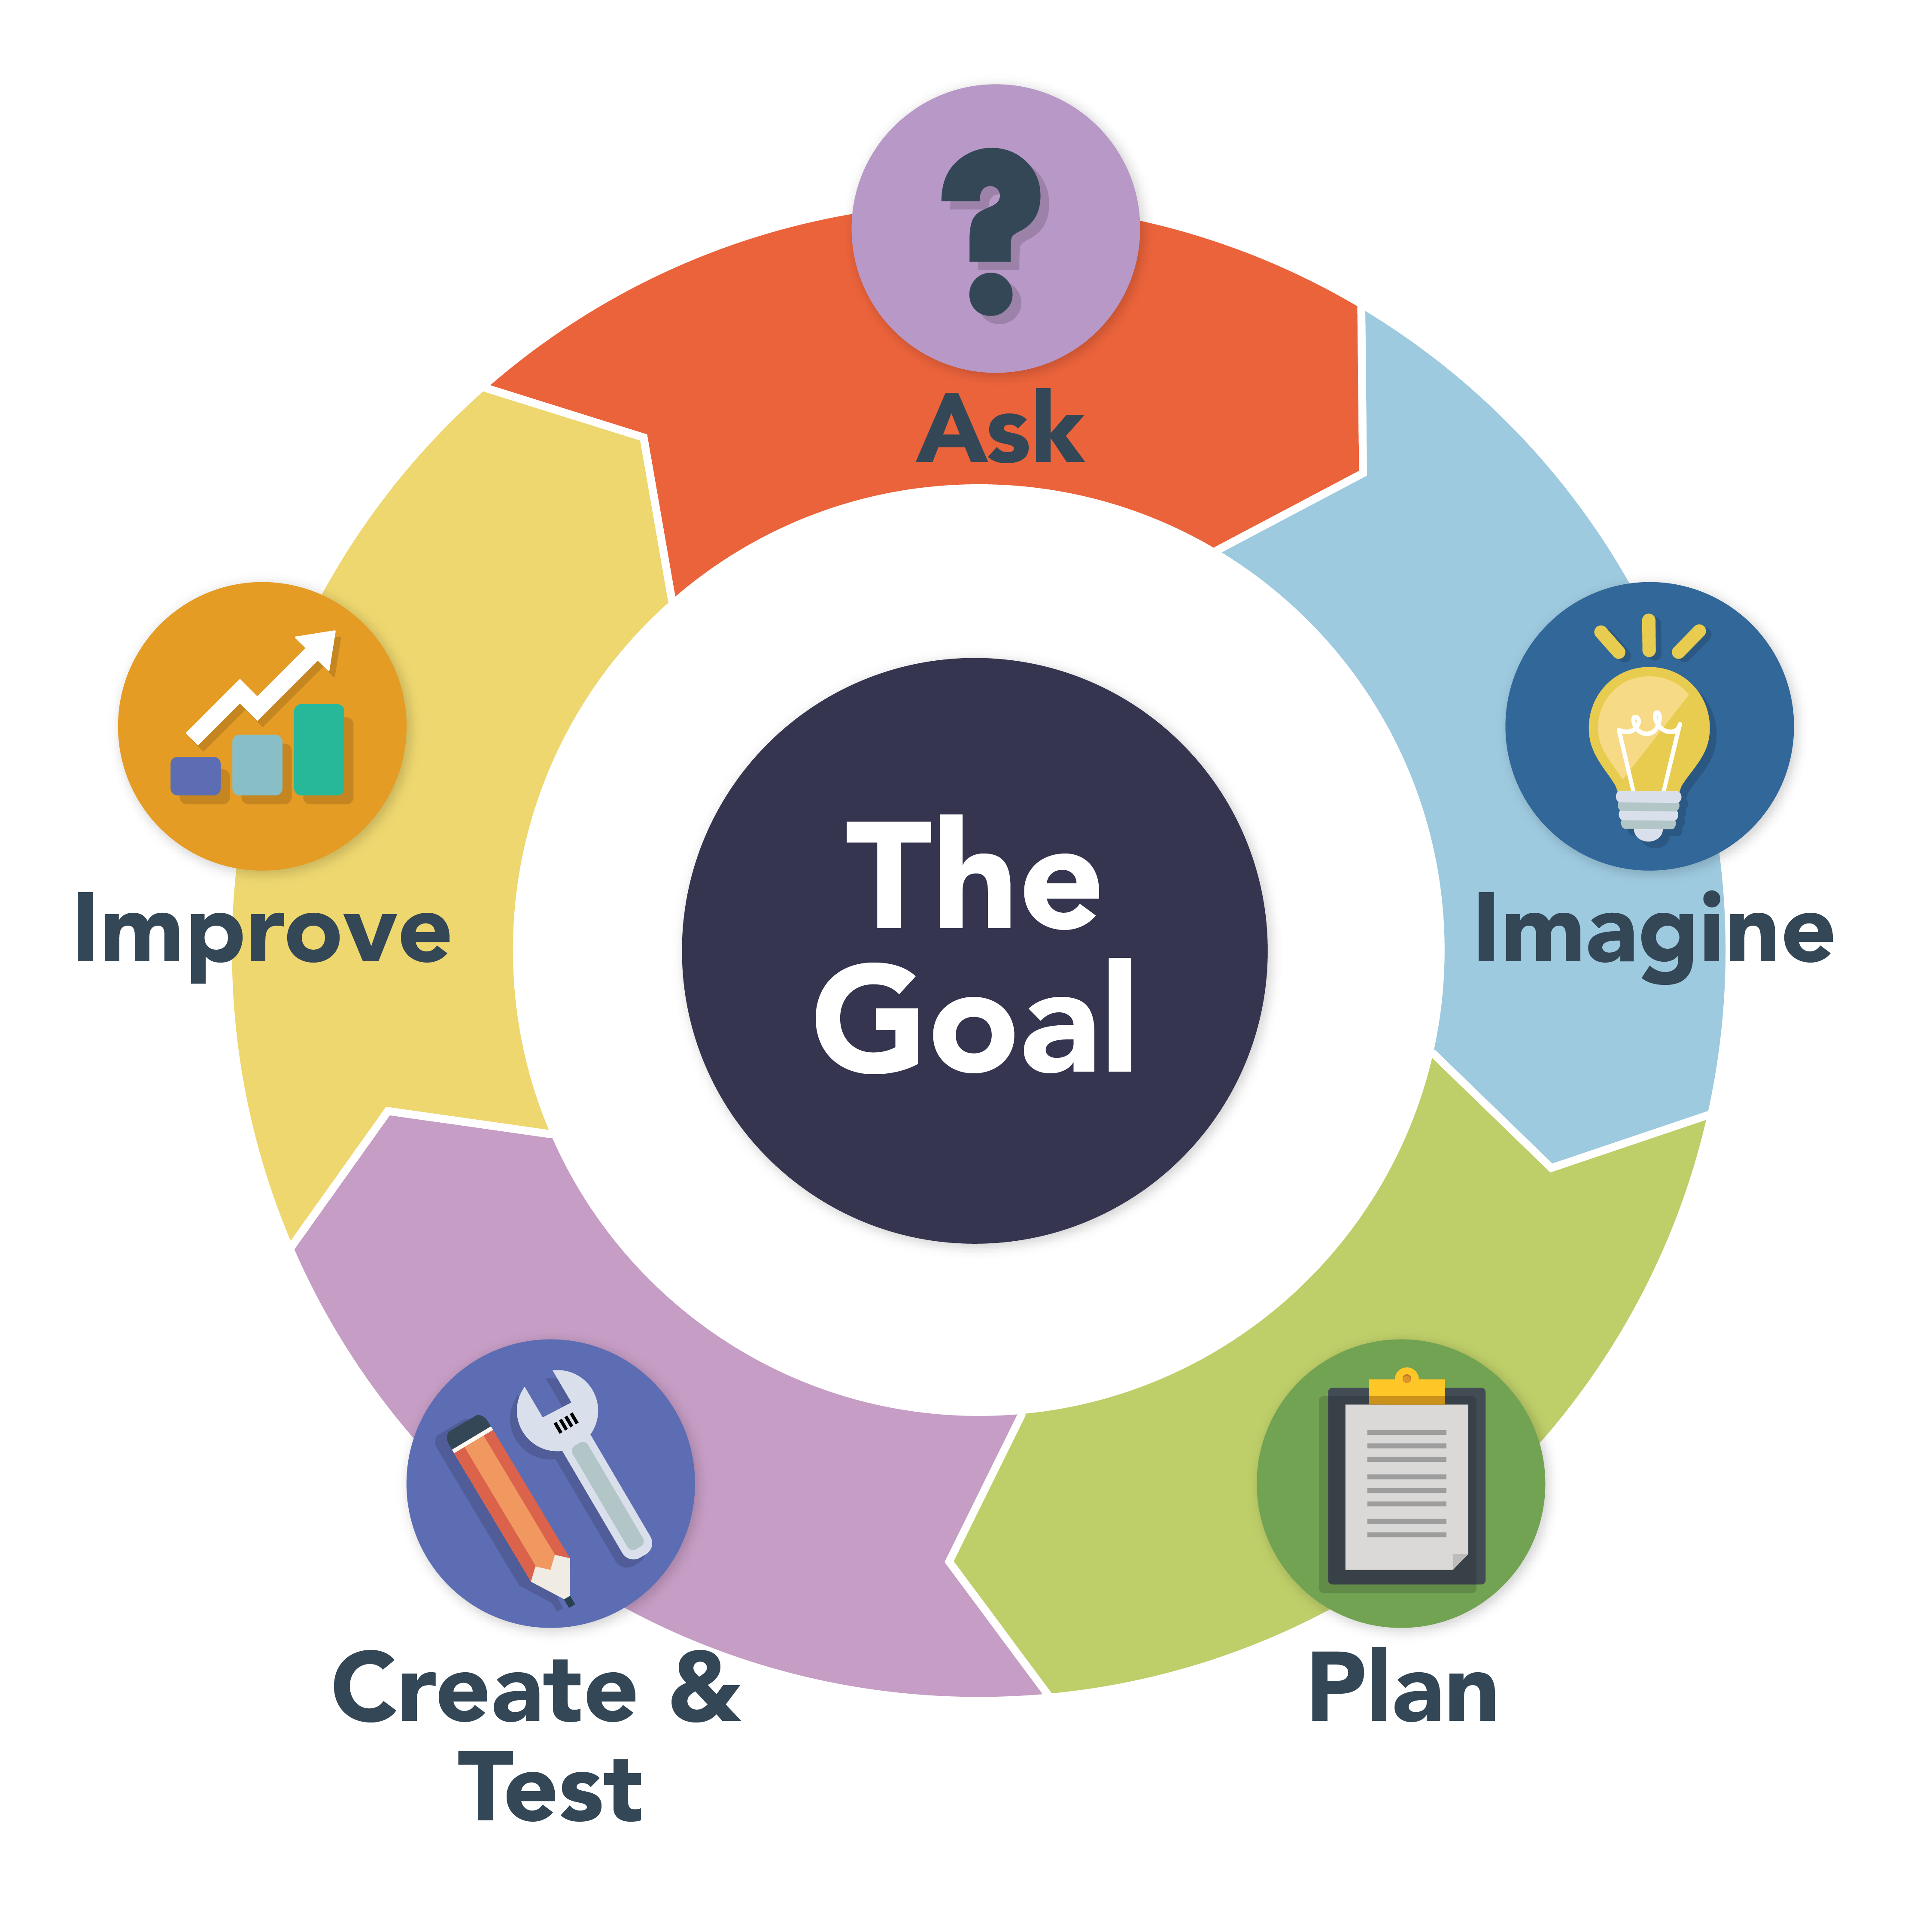 The Goal: Ask, Imagine, Plan, Create & Test, and Improve